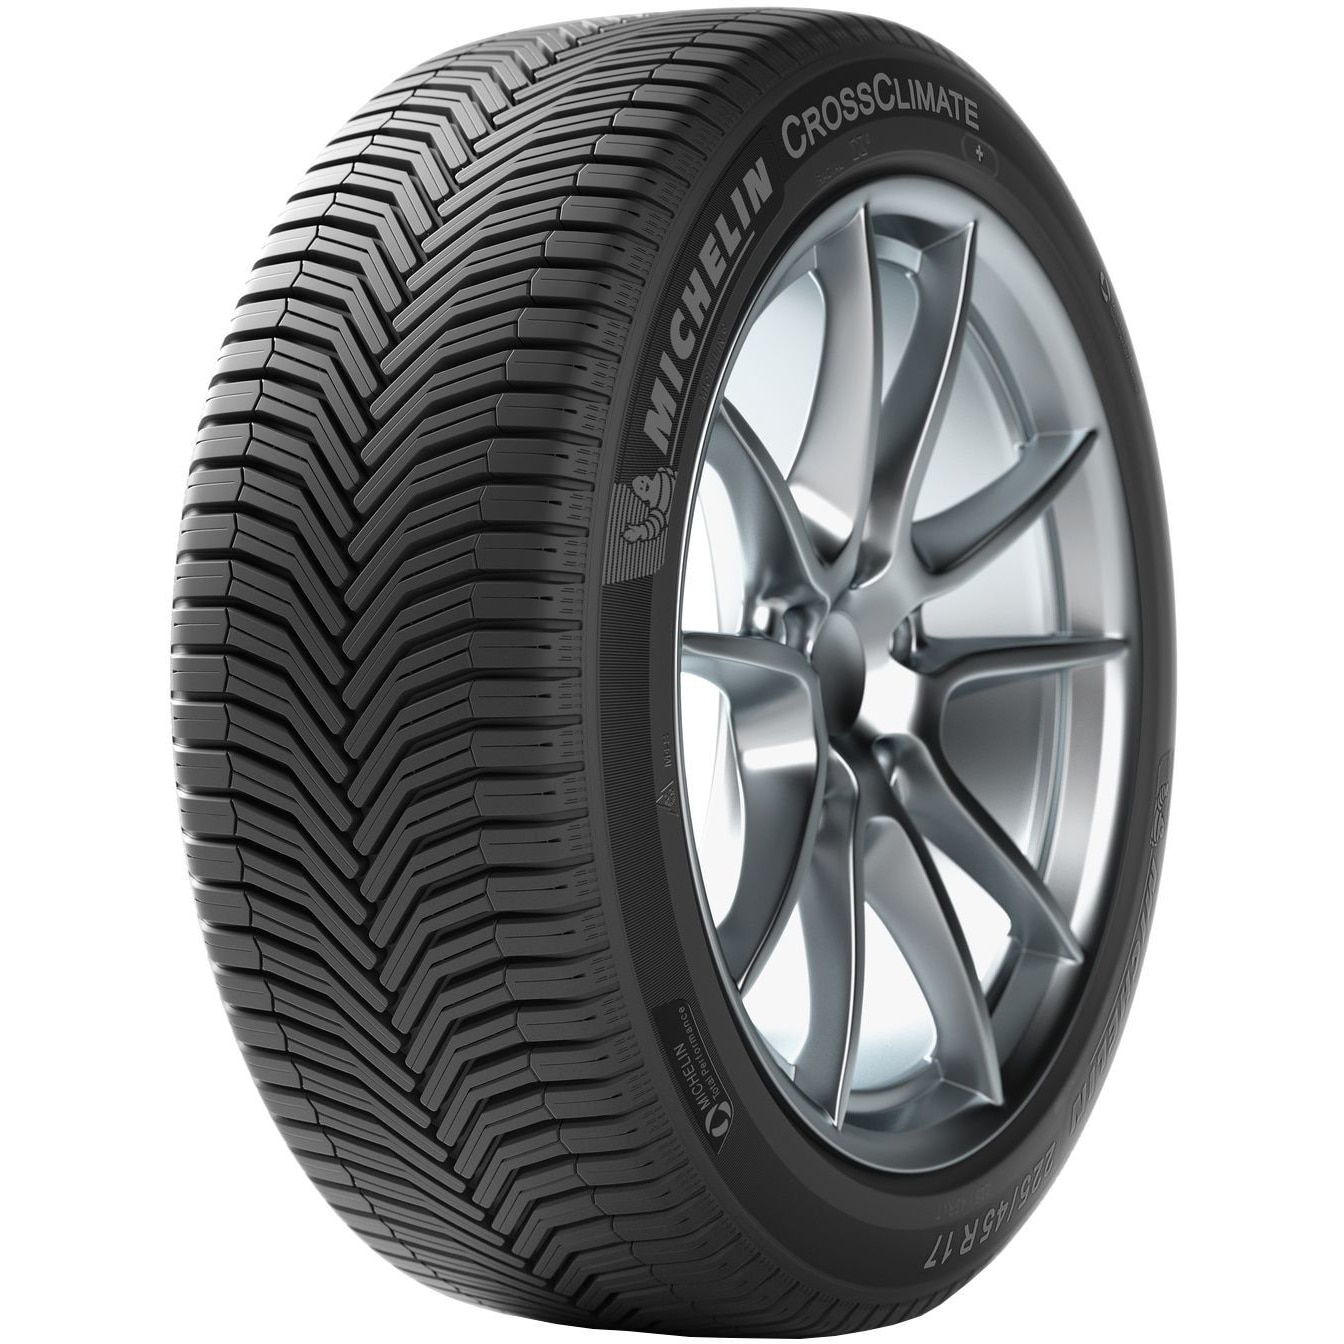 election Asser alley Anvelopa All Season Michelin CROSSCLIMATE+ 165/70 R14 85T XL - eMAG.ro